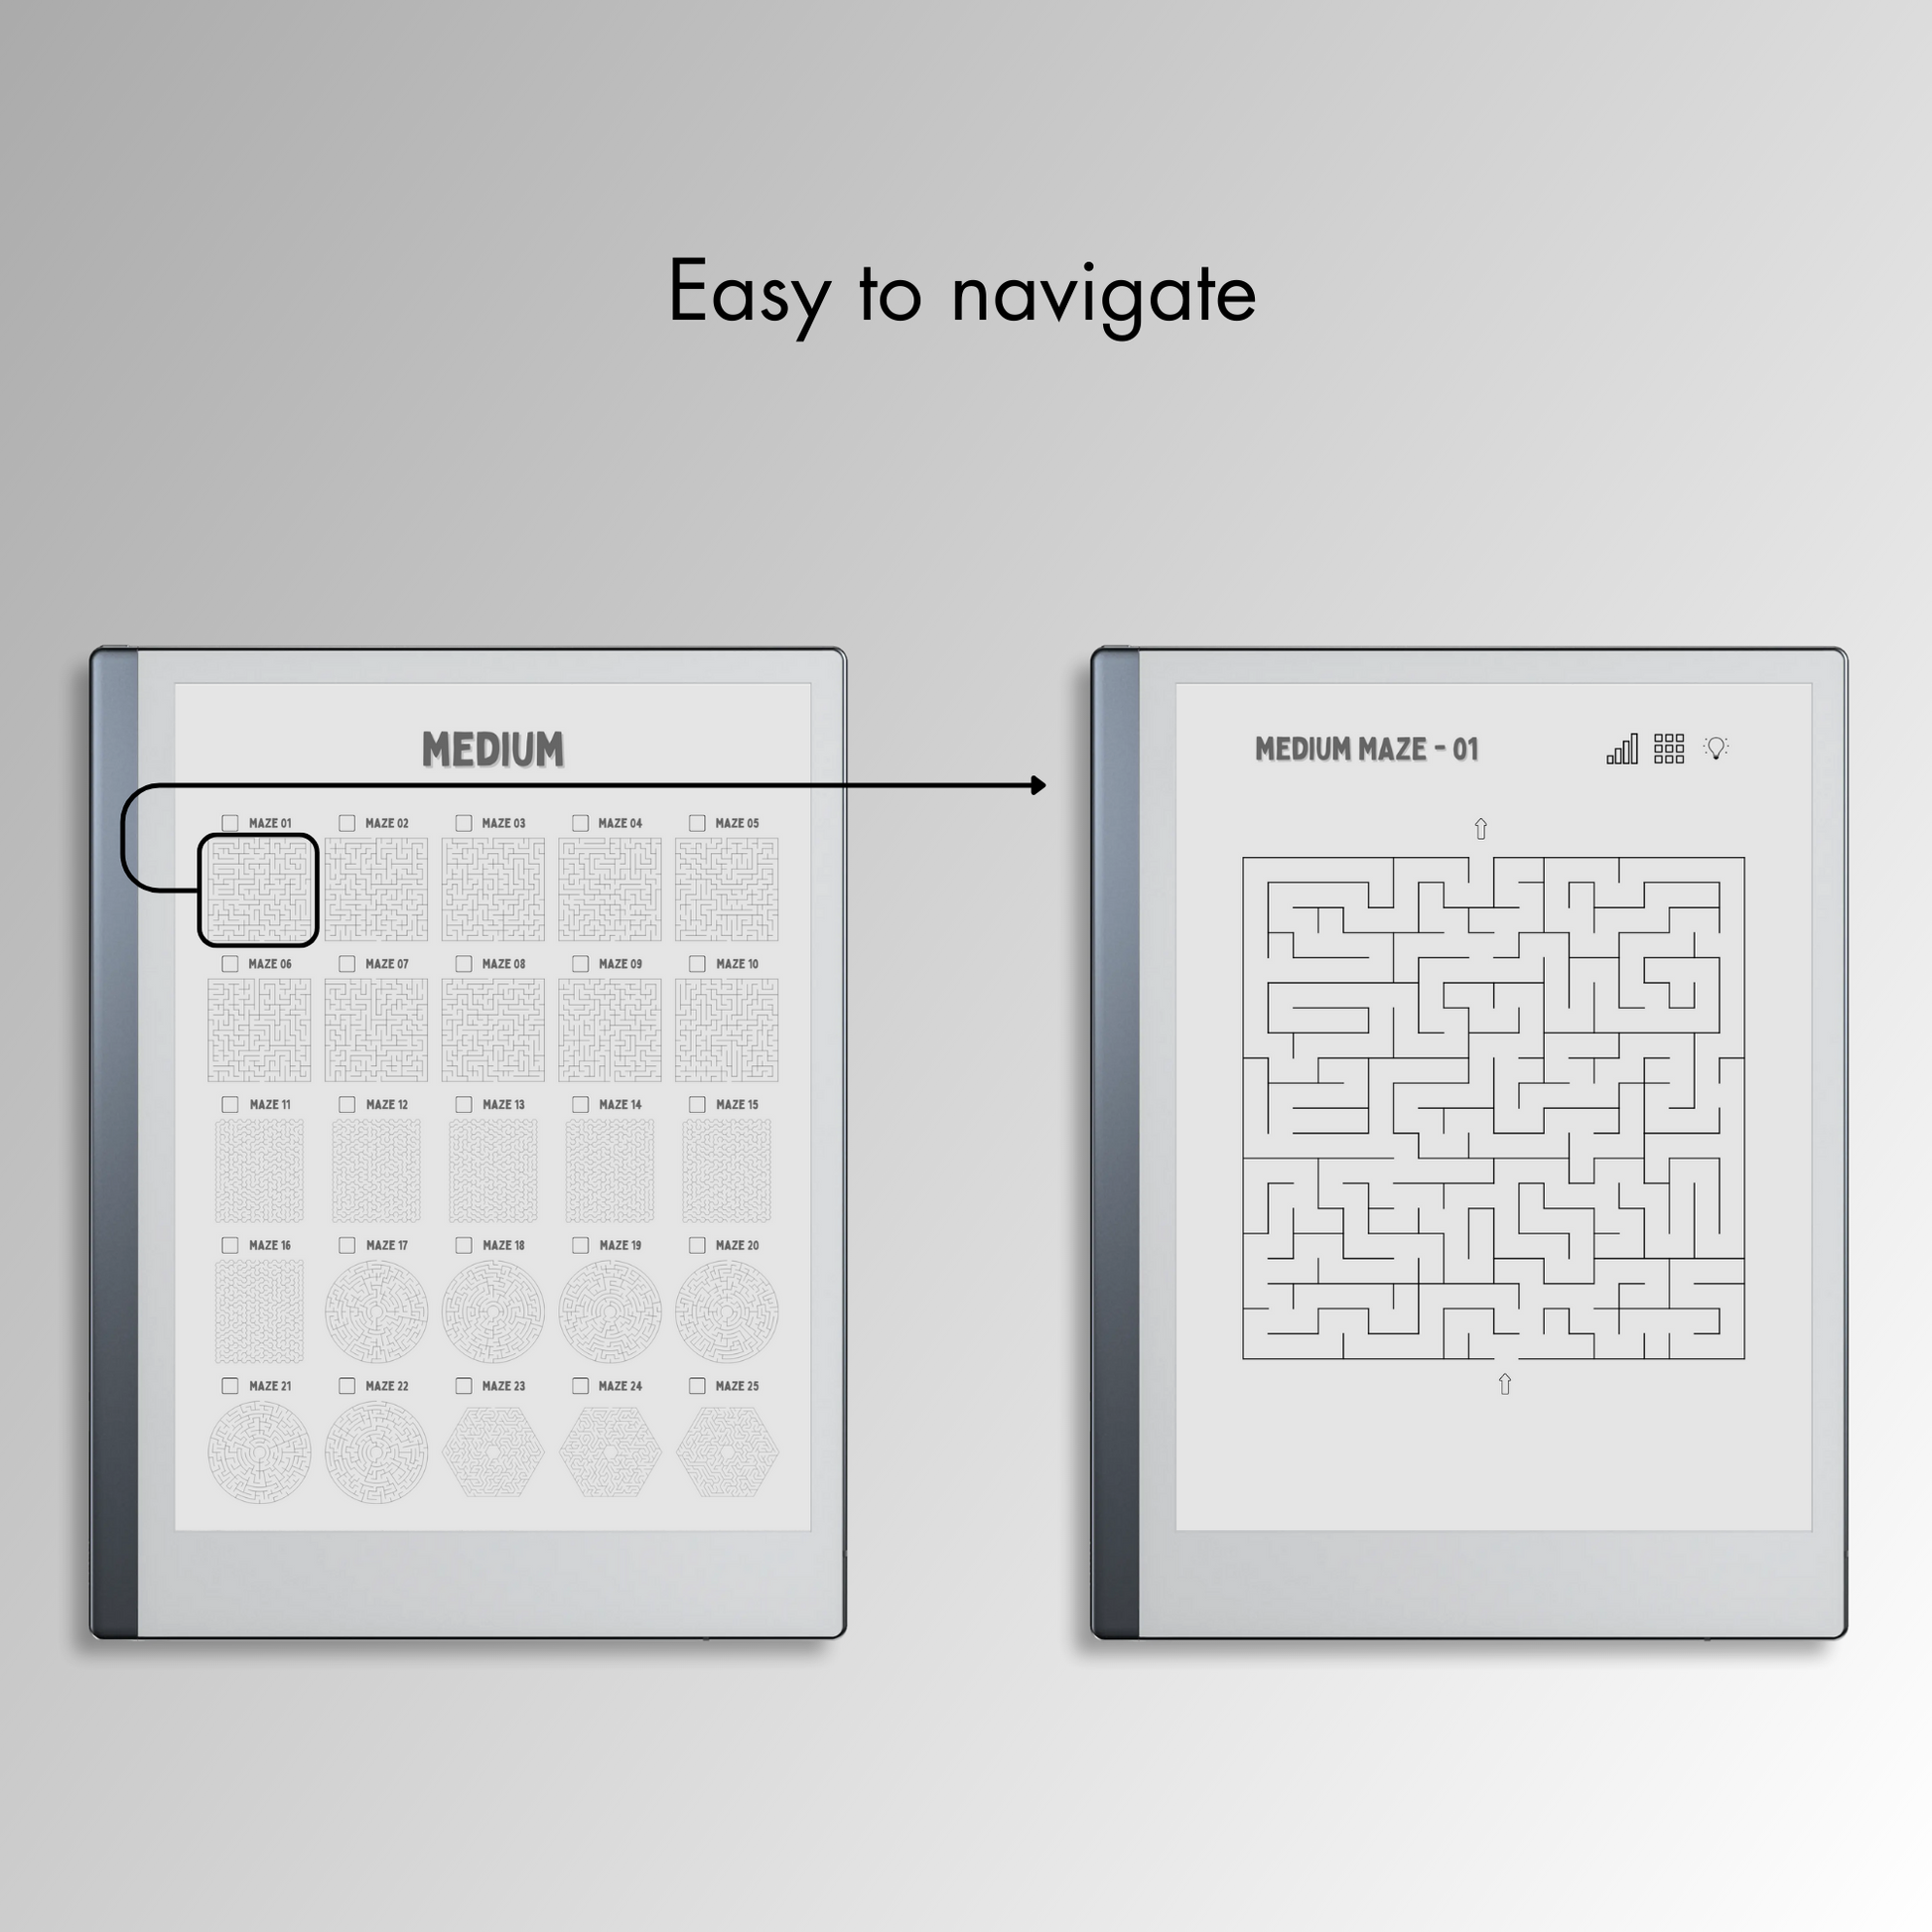 Remarkable 2 Maze Puzzles with easy navigations.